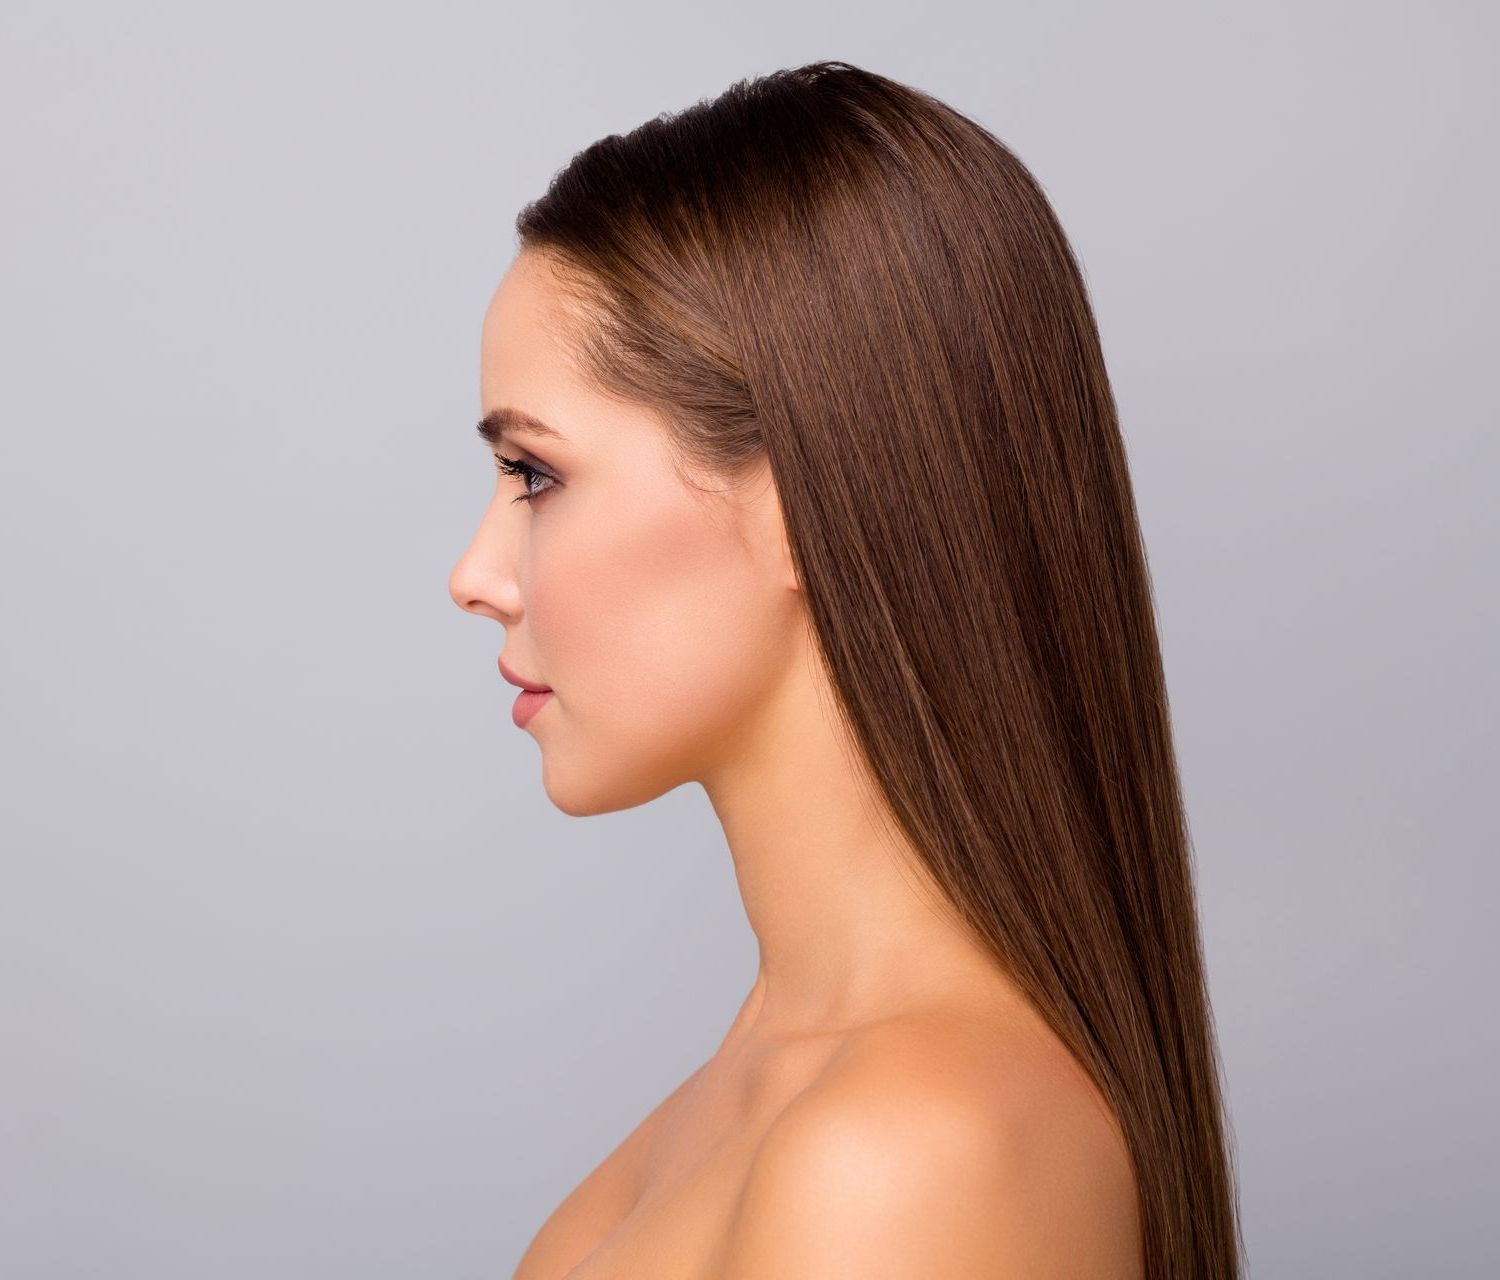 woman with attractive side profile, sharp jawline